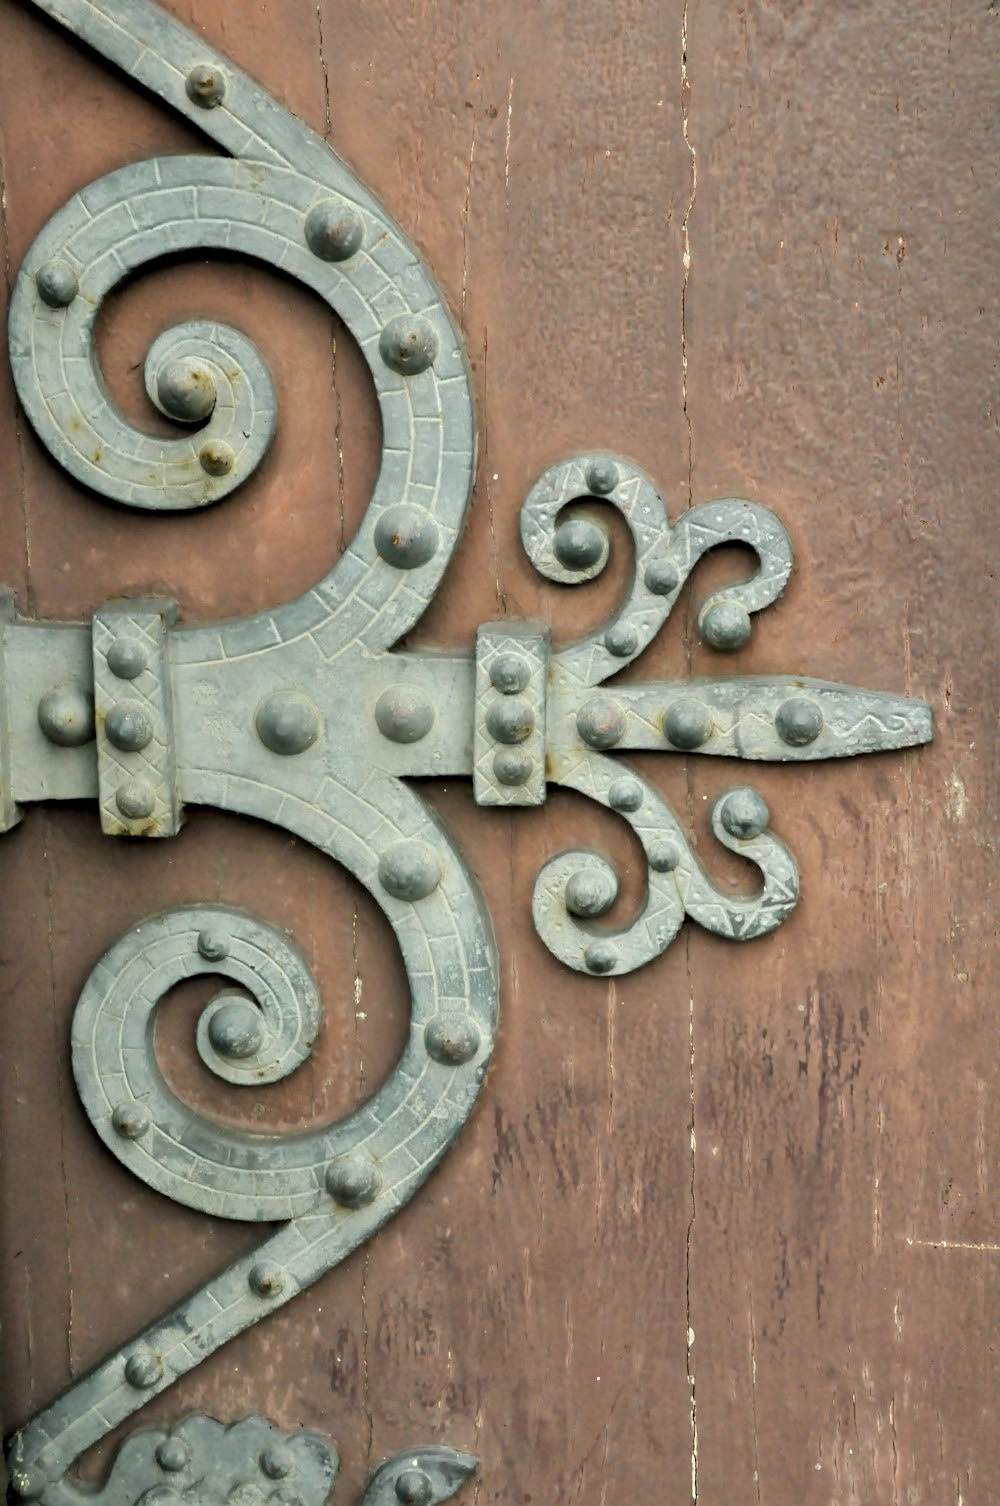 a close up of a metal object on a door